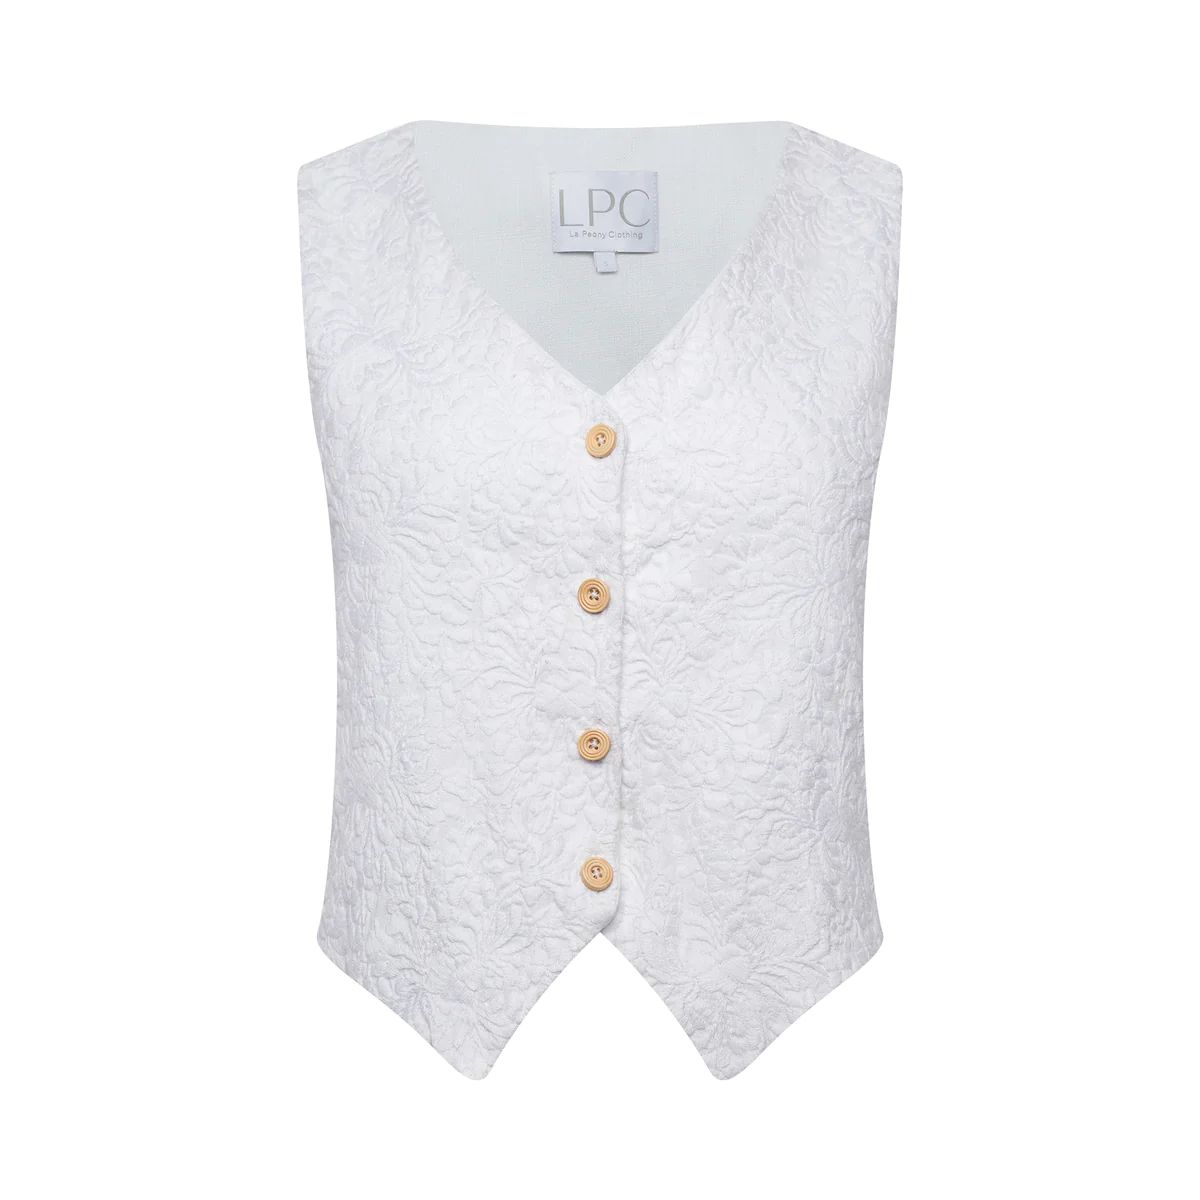 The Macfarland Vest in White on White | La Peony Clothing